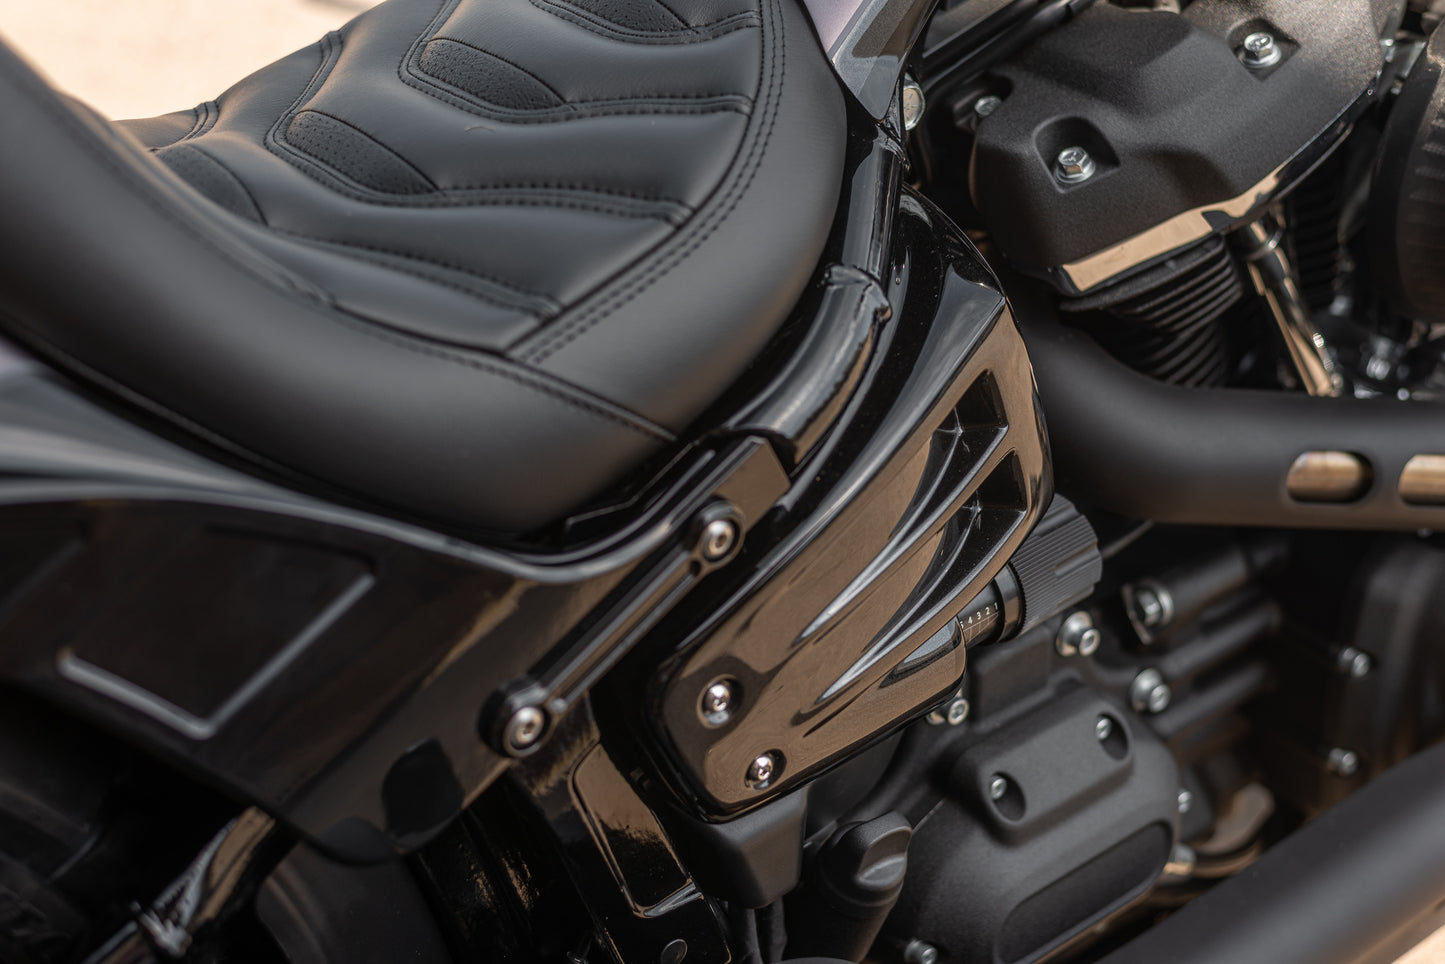 Zoomed Harley Davidson motorcycle with "Avenger" side covers from the side 